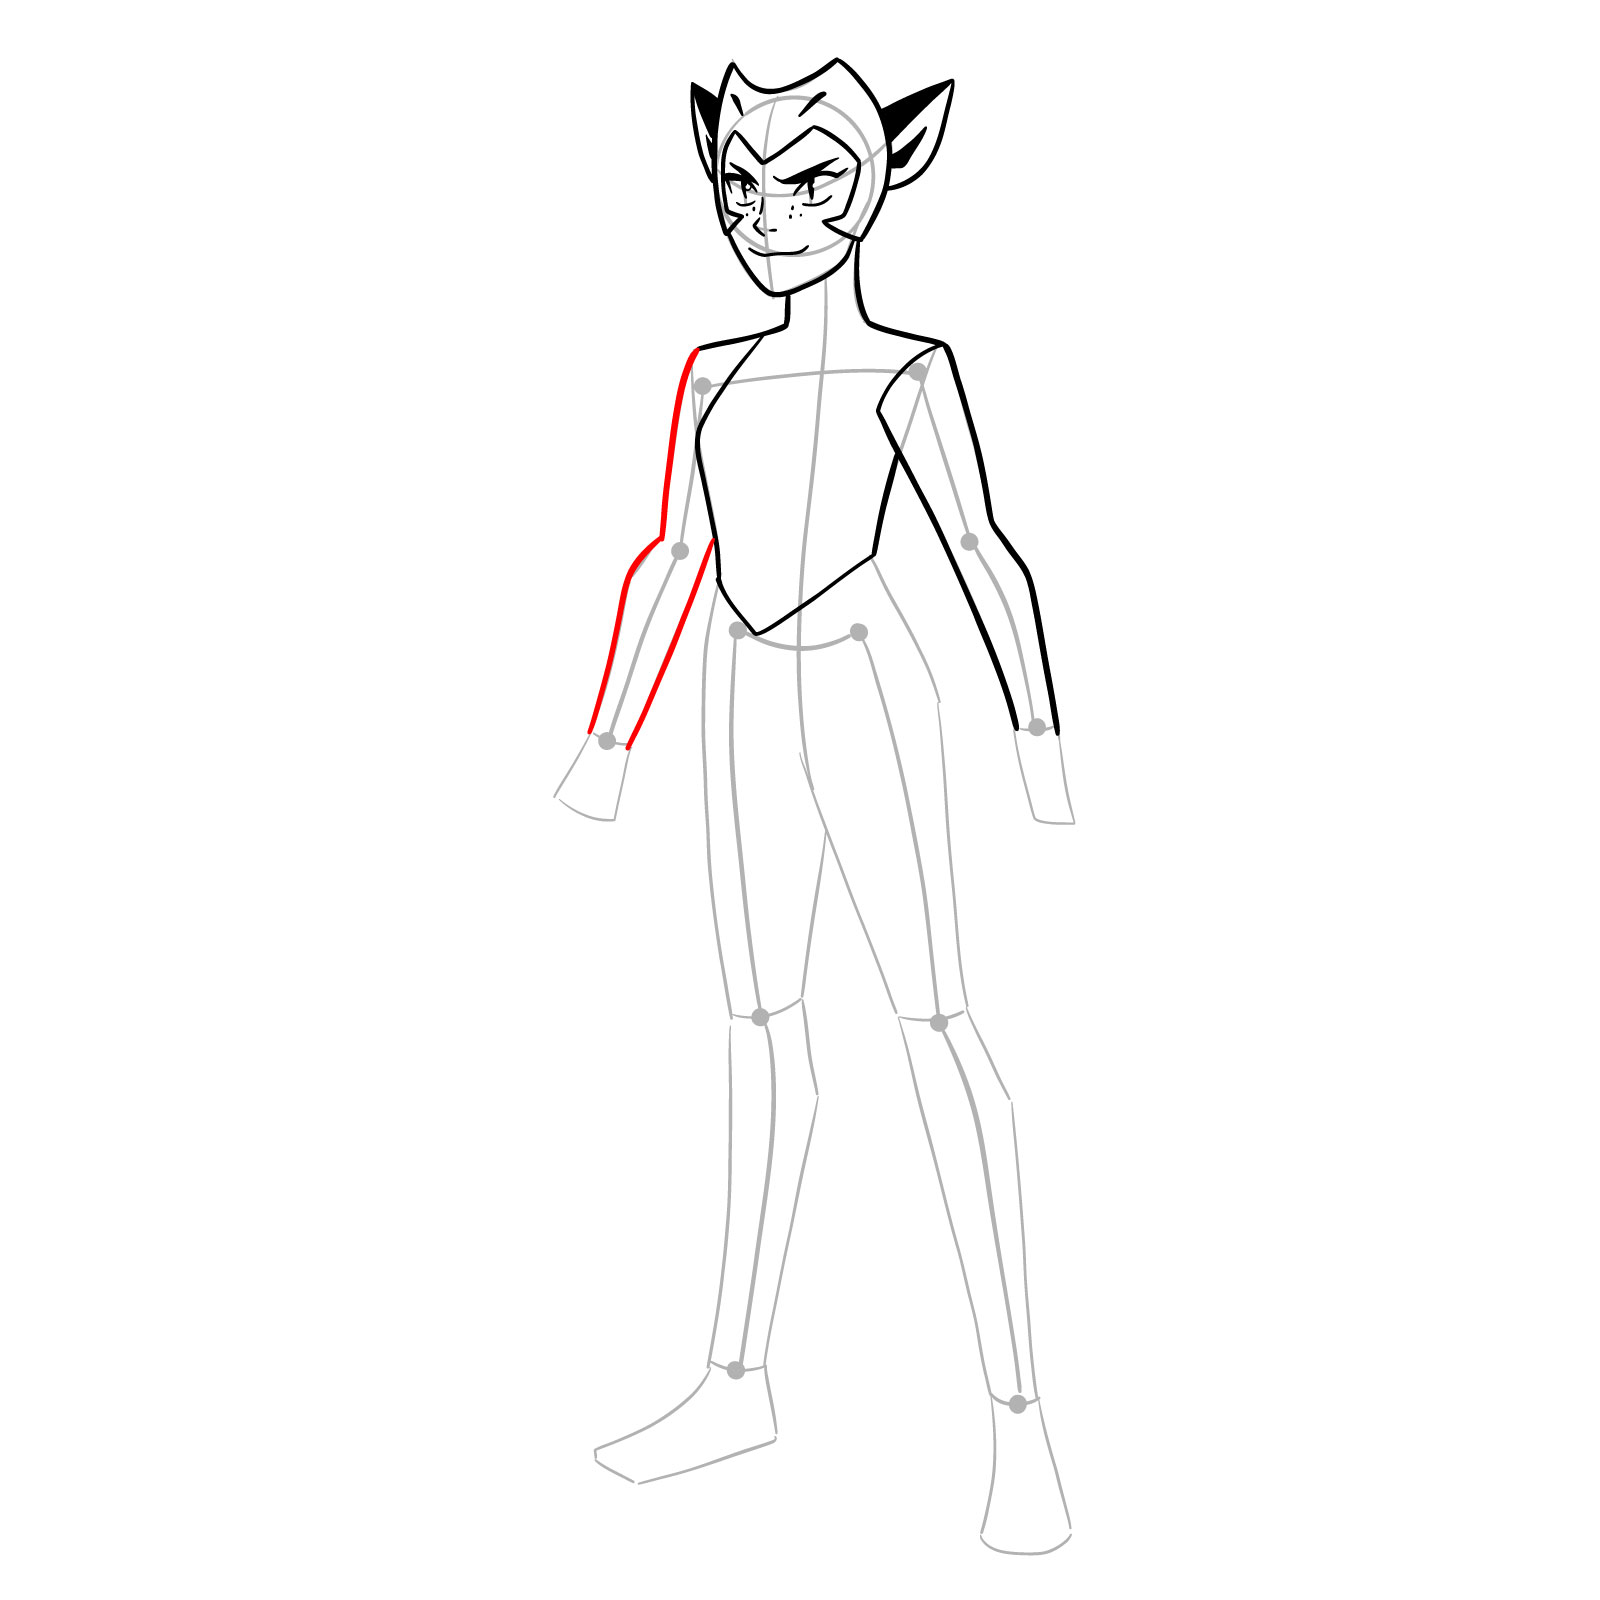 How to draw Catra from She-Ra and the Princesses of Power - step 10